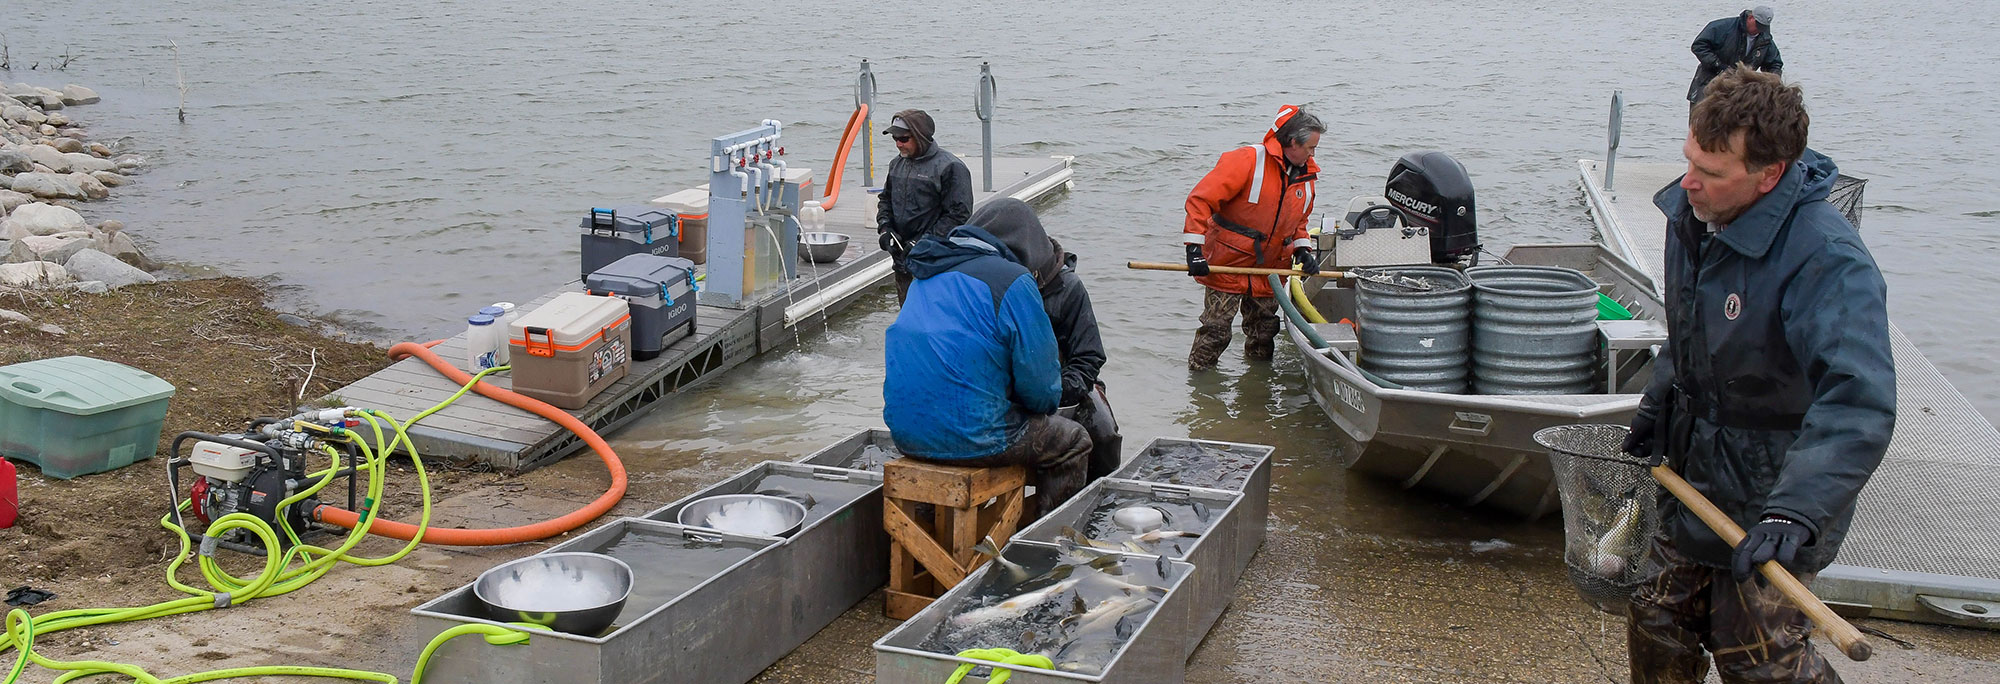 During the walleye spawn on Lake Sakakawea, there is little time for pause as fisheries biologists from both the Game and Fish Department and the U.S. Fish and Wildlife Service work to remove eggs and milt from spawning fish.